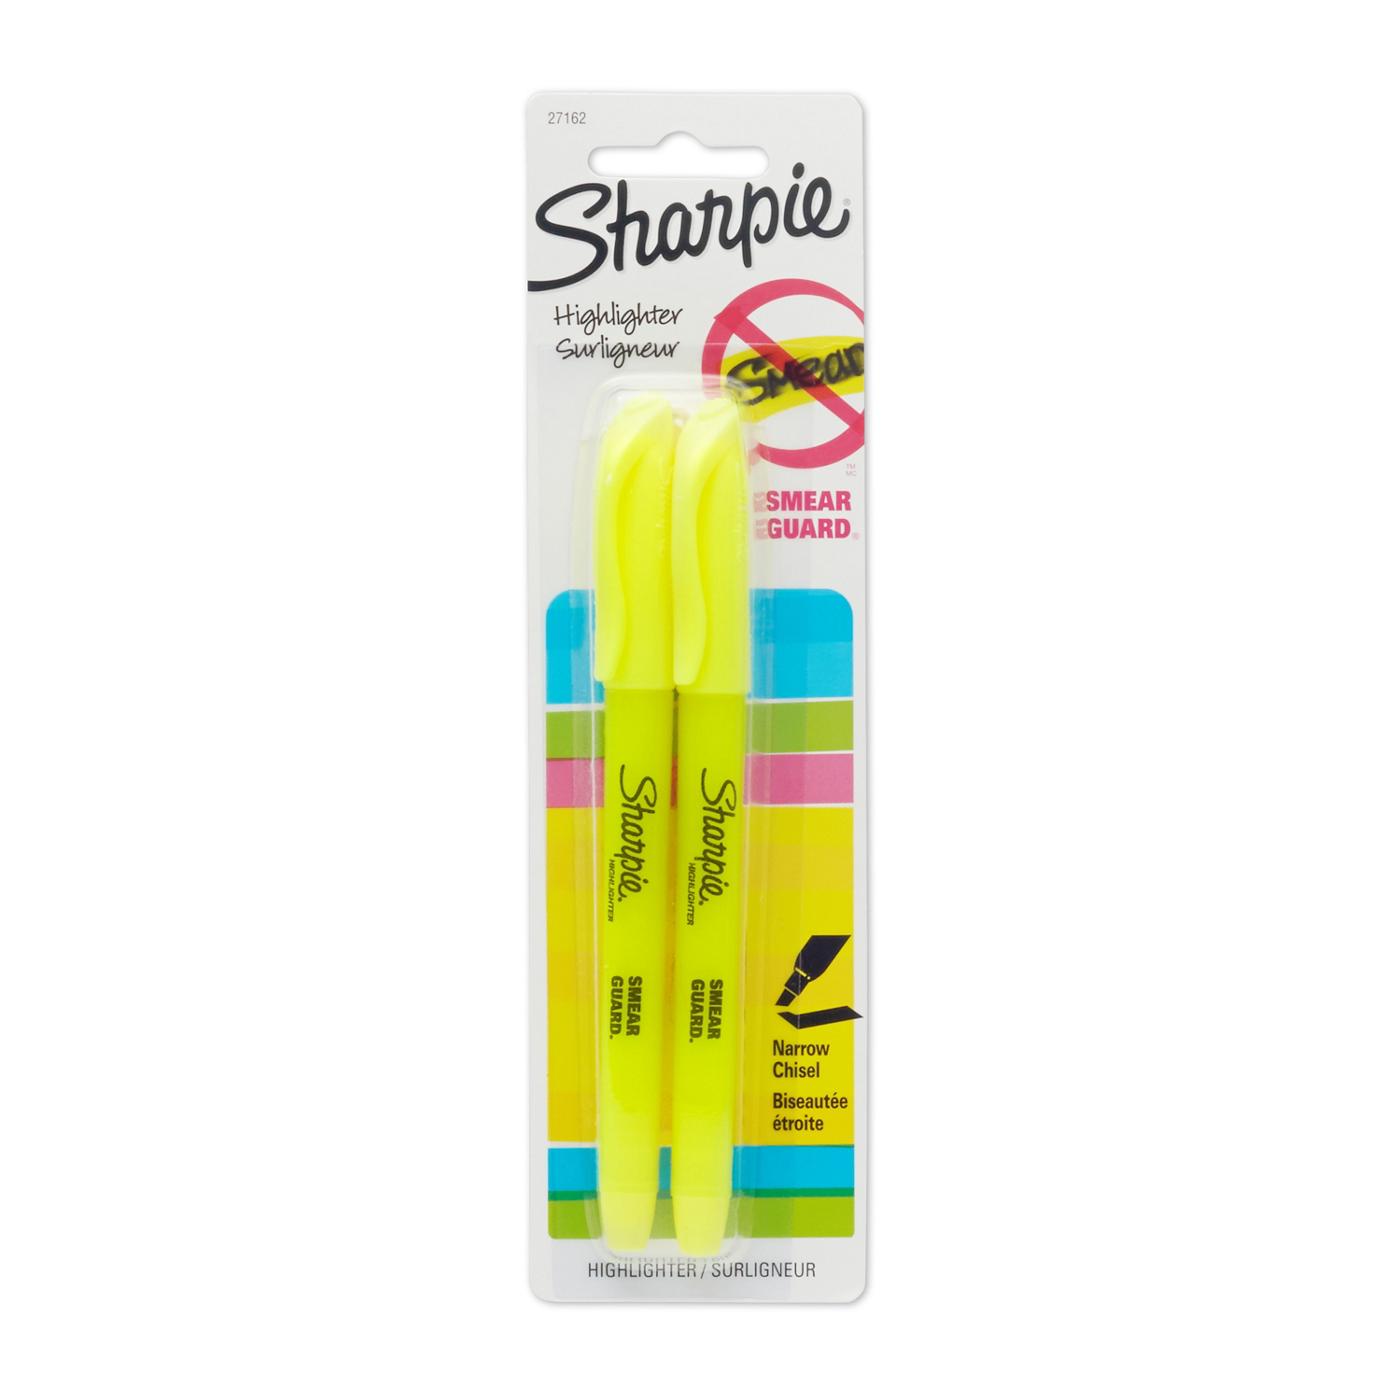 Sharpie Narrow Chisel Tip Pocket Highlighters - Yellow Ink; image 1 of 2